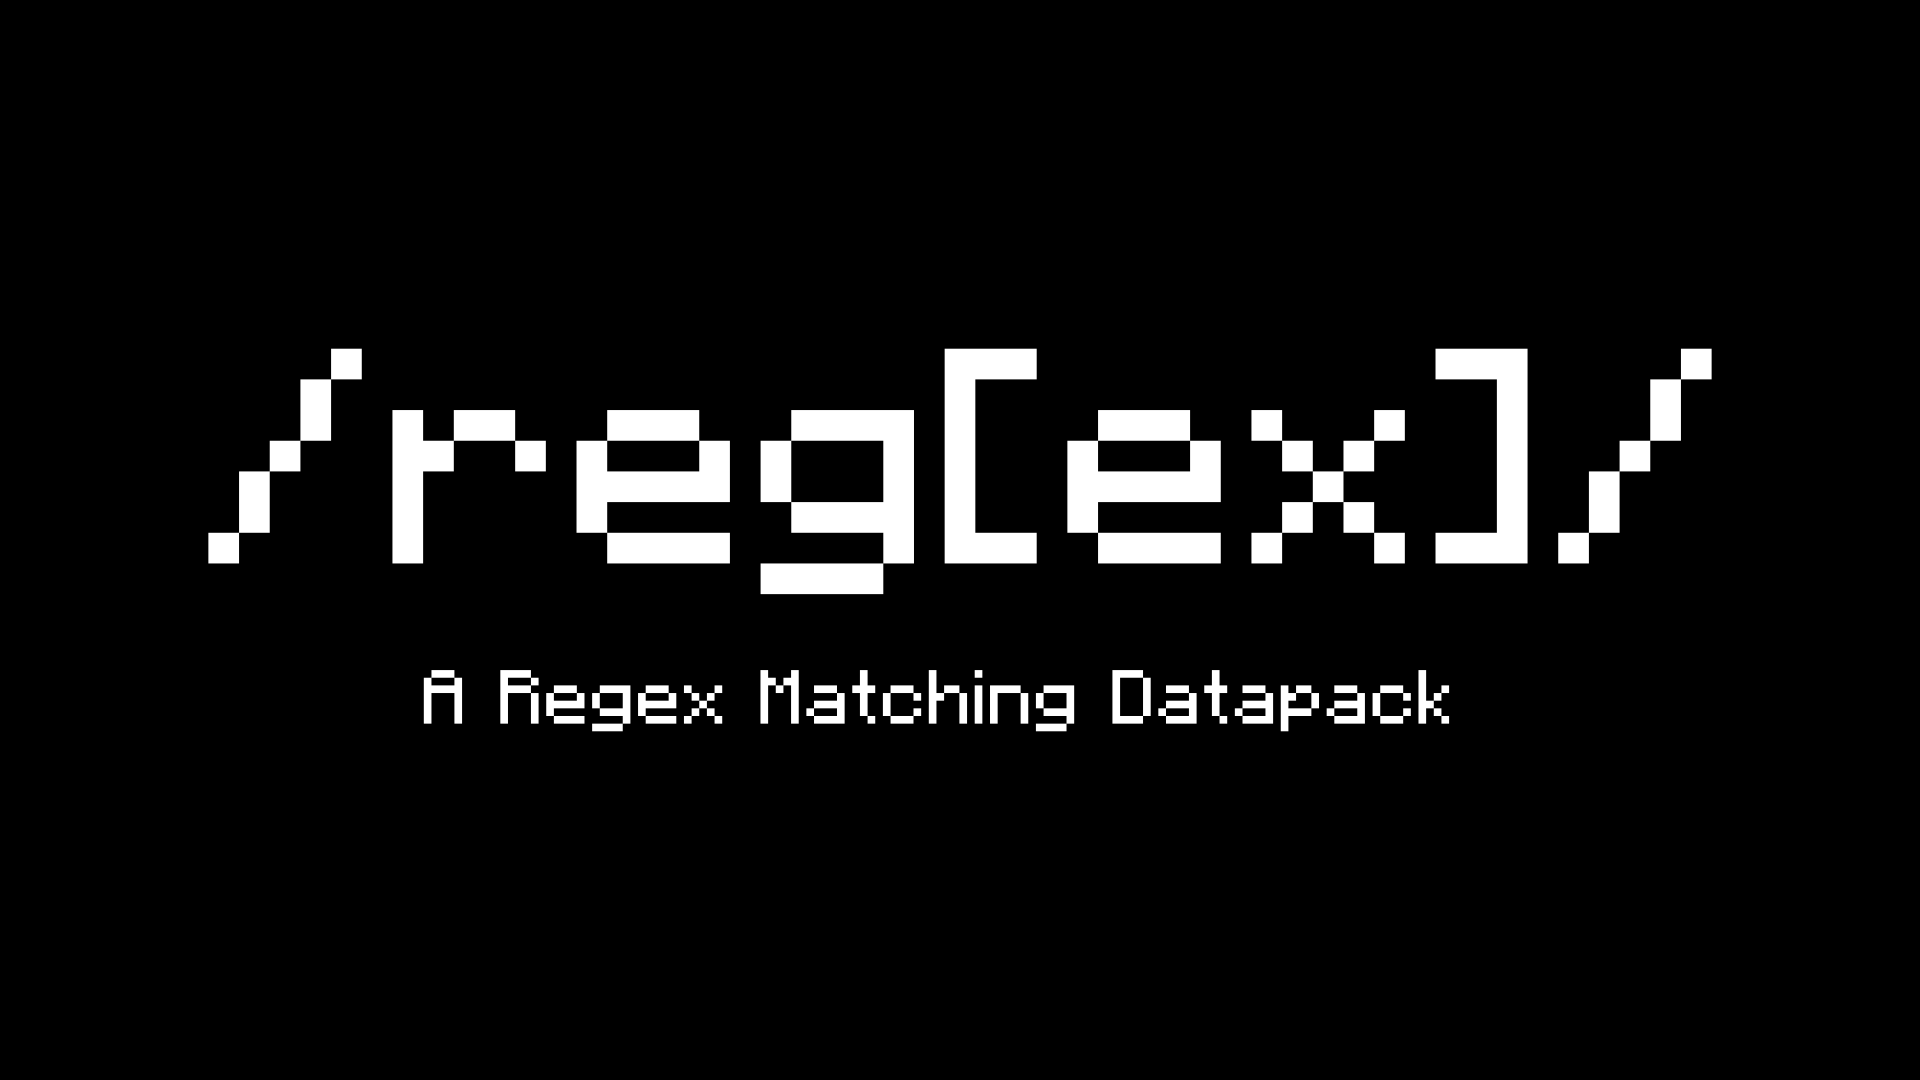 A datapack library that provides a way to match substrings using regular expressions.